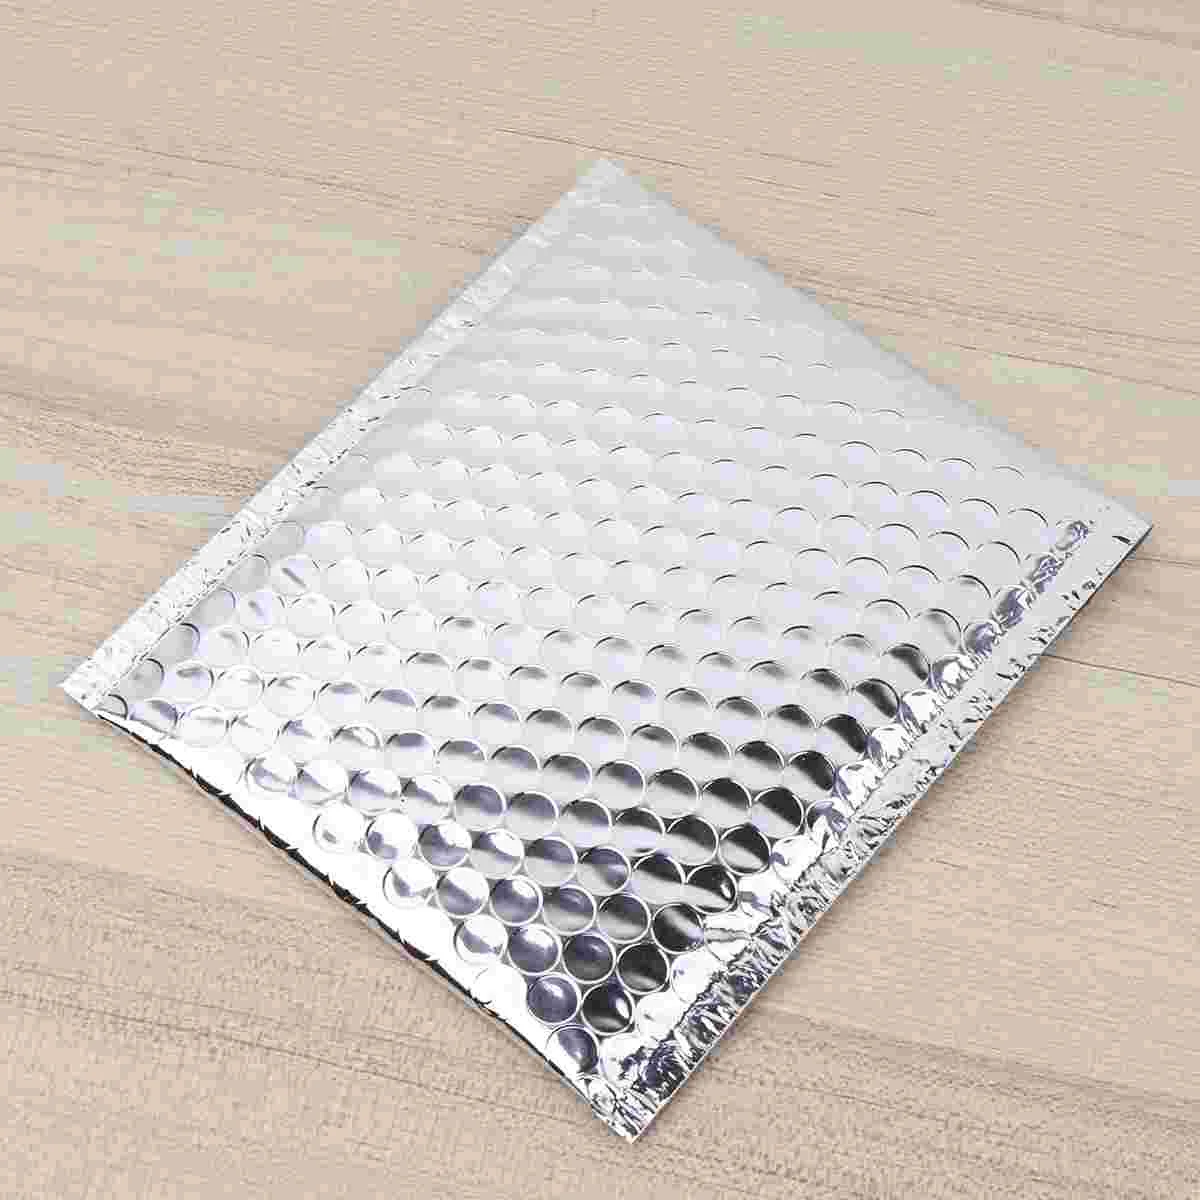 28 Pcs Bubble Bag Shockproof Packaging Metal Small Envelope Waterproof Logistic Express packaging material pearl cotton bag soft foam board film bubble filled shockproof 100pcs 15 25cm specifications